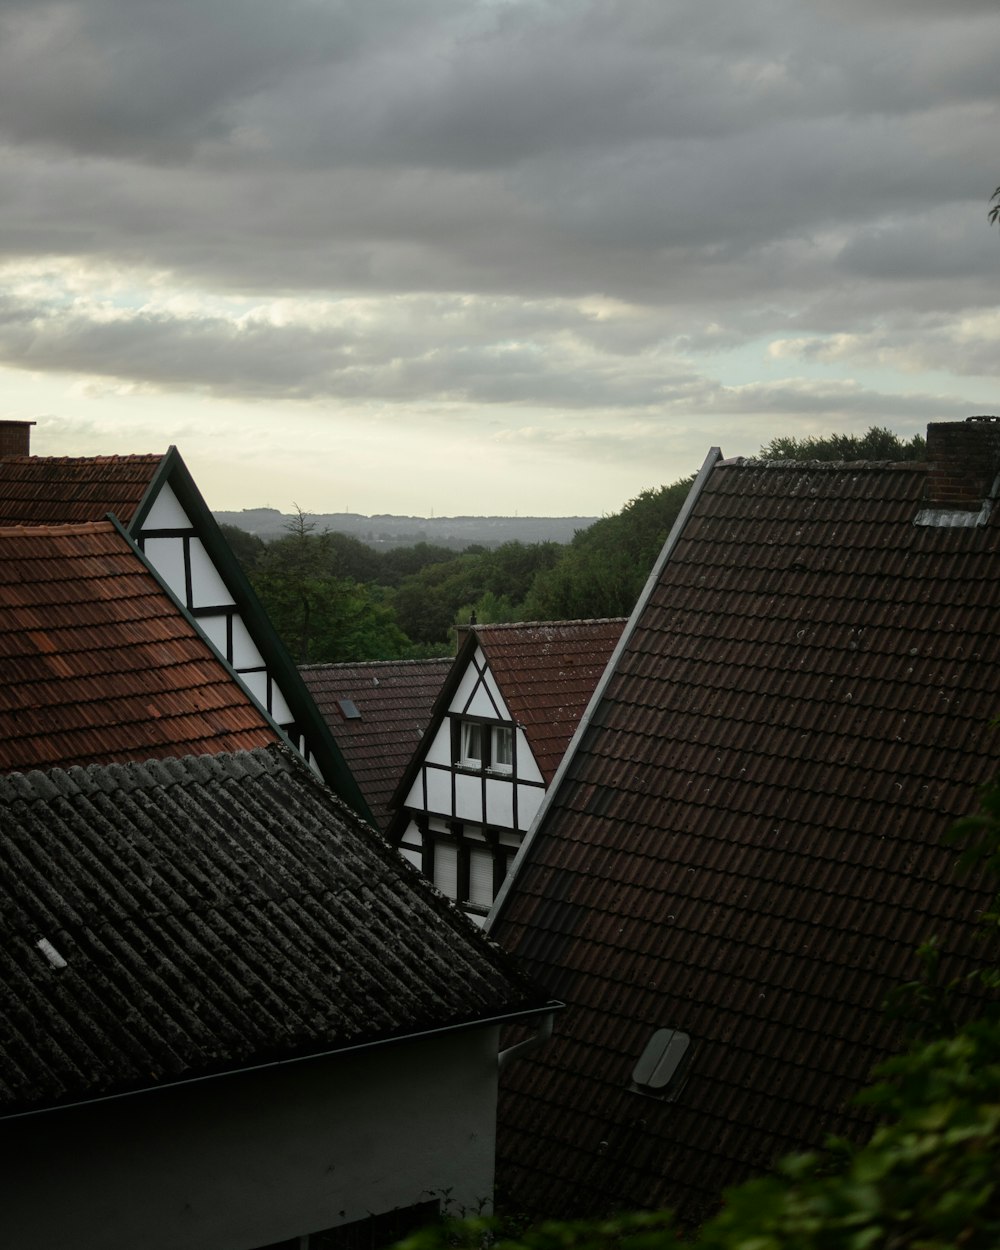 a group of rooftops with trees in the background